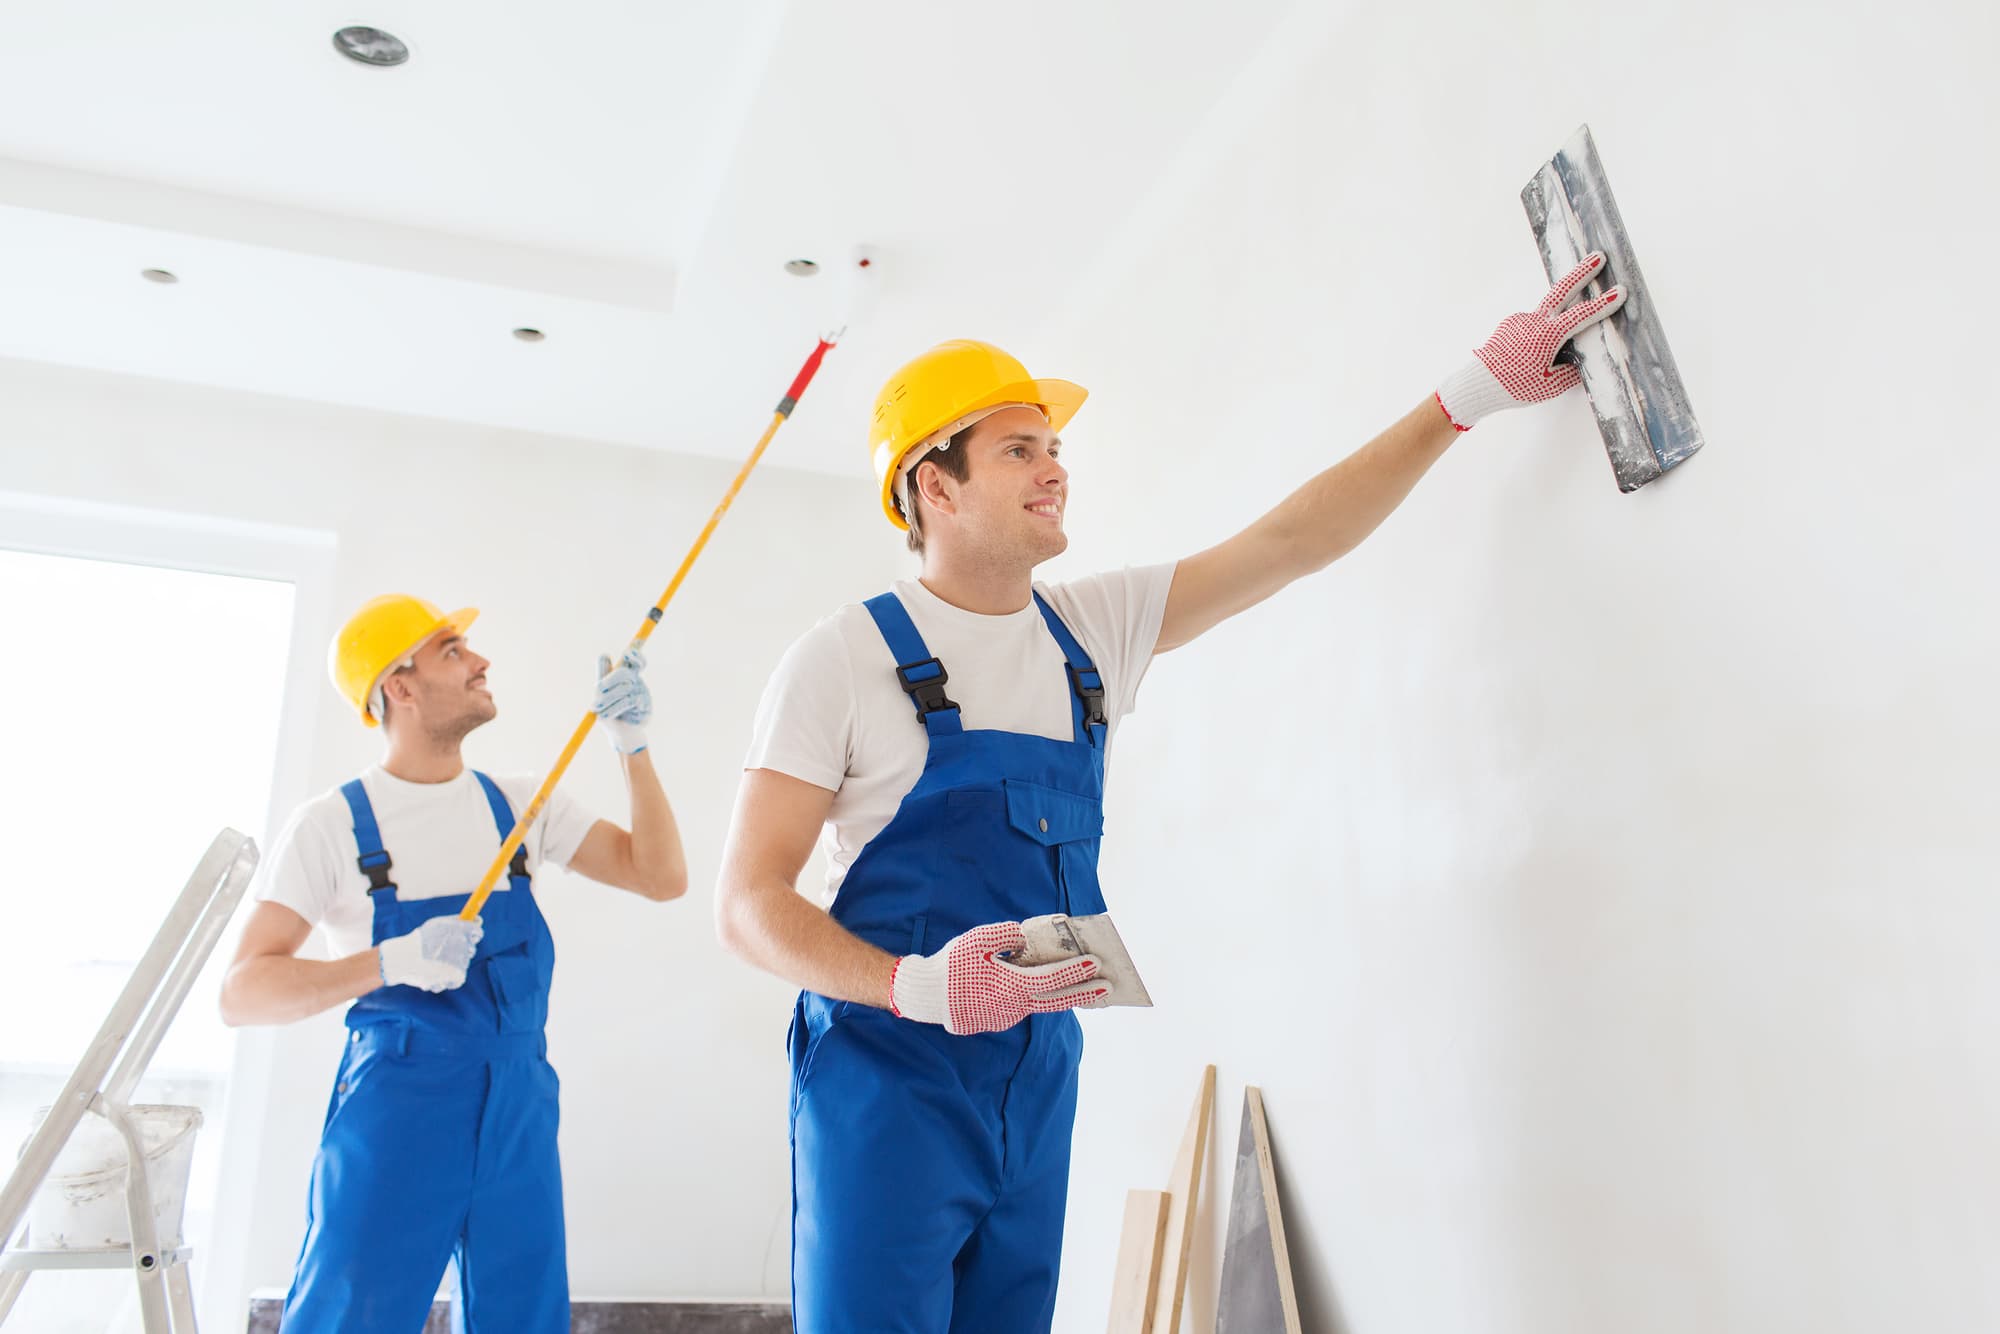 Professional Painters-Cypress TX Professional Painting Contractors-We offer Residential & Commercial Painting, Interior Painting, Exterior Painting, Primer Painting, Industrial Painting, Professional Painters, Institutional Painters, and more.